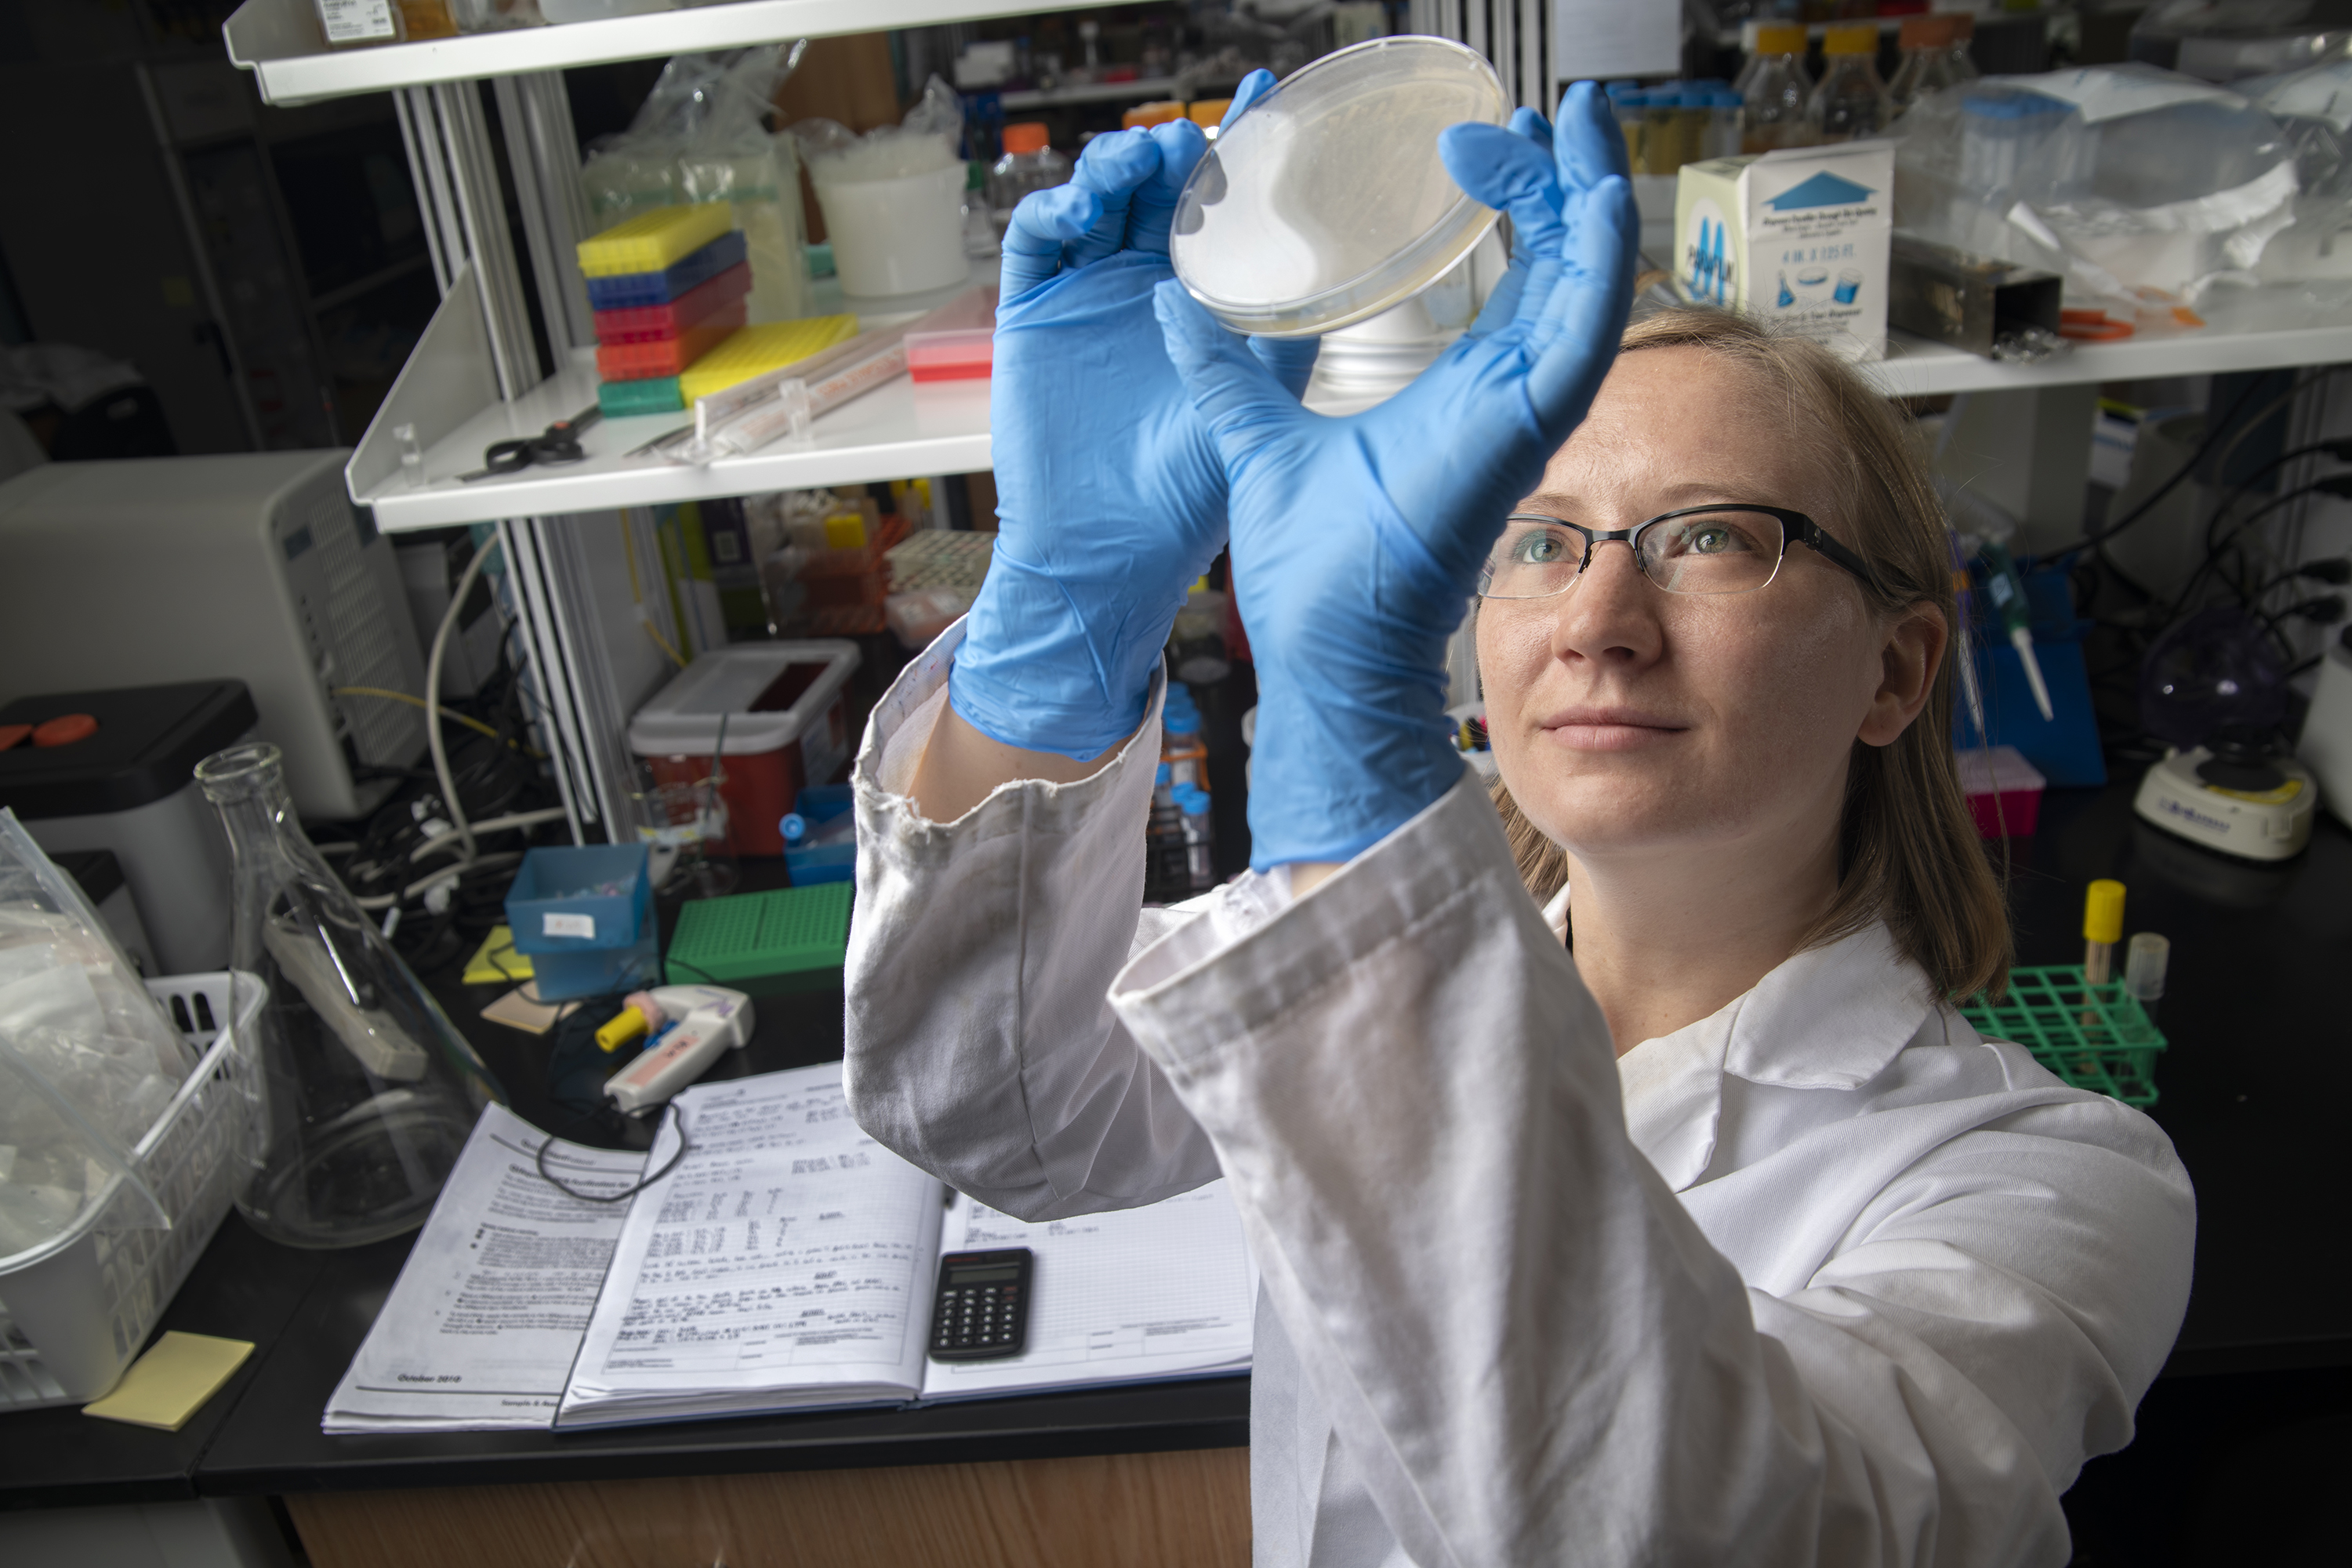 Graduate research assistant Kelly Michie coauthored the study. Here, she holds up a dish with a bacteria culture. Credit: Georgia Tech / Christopher Moore